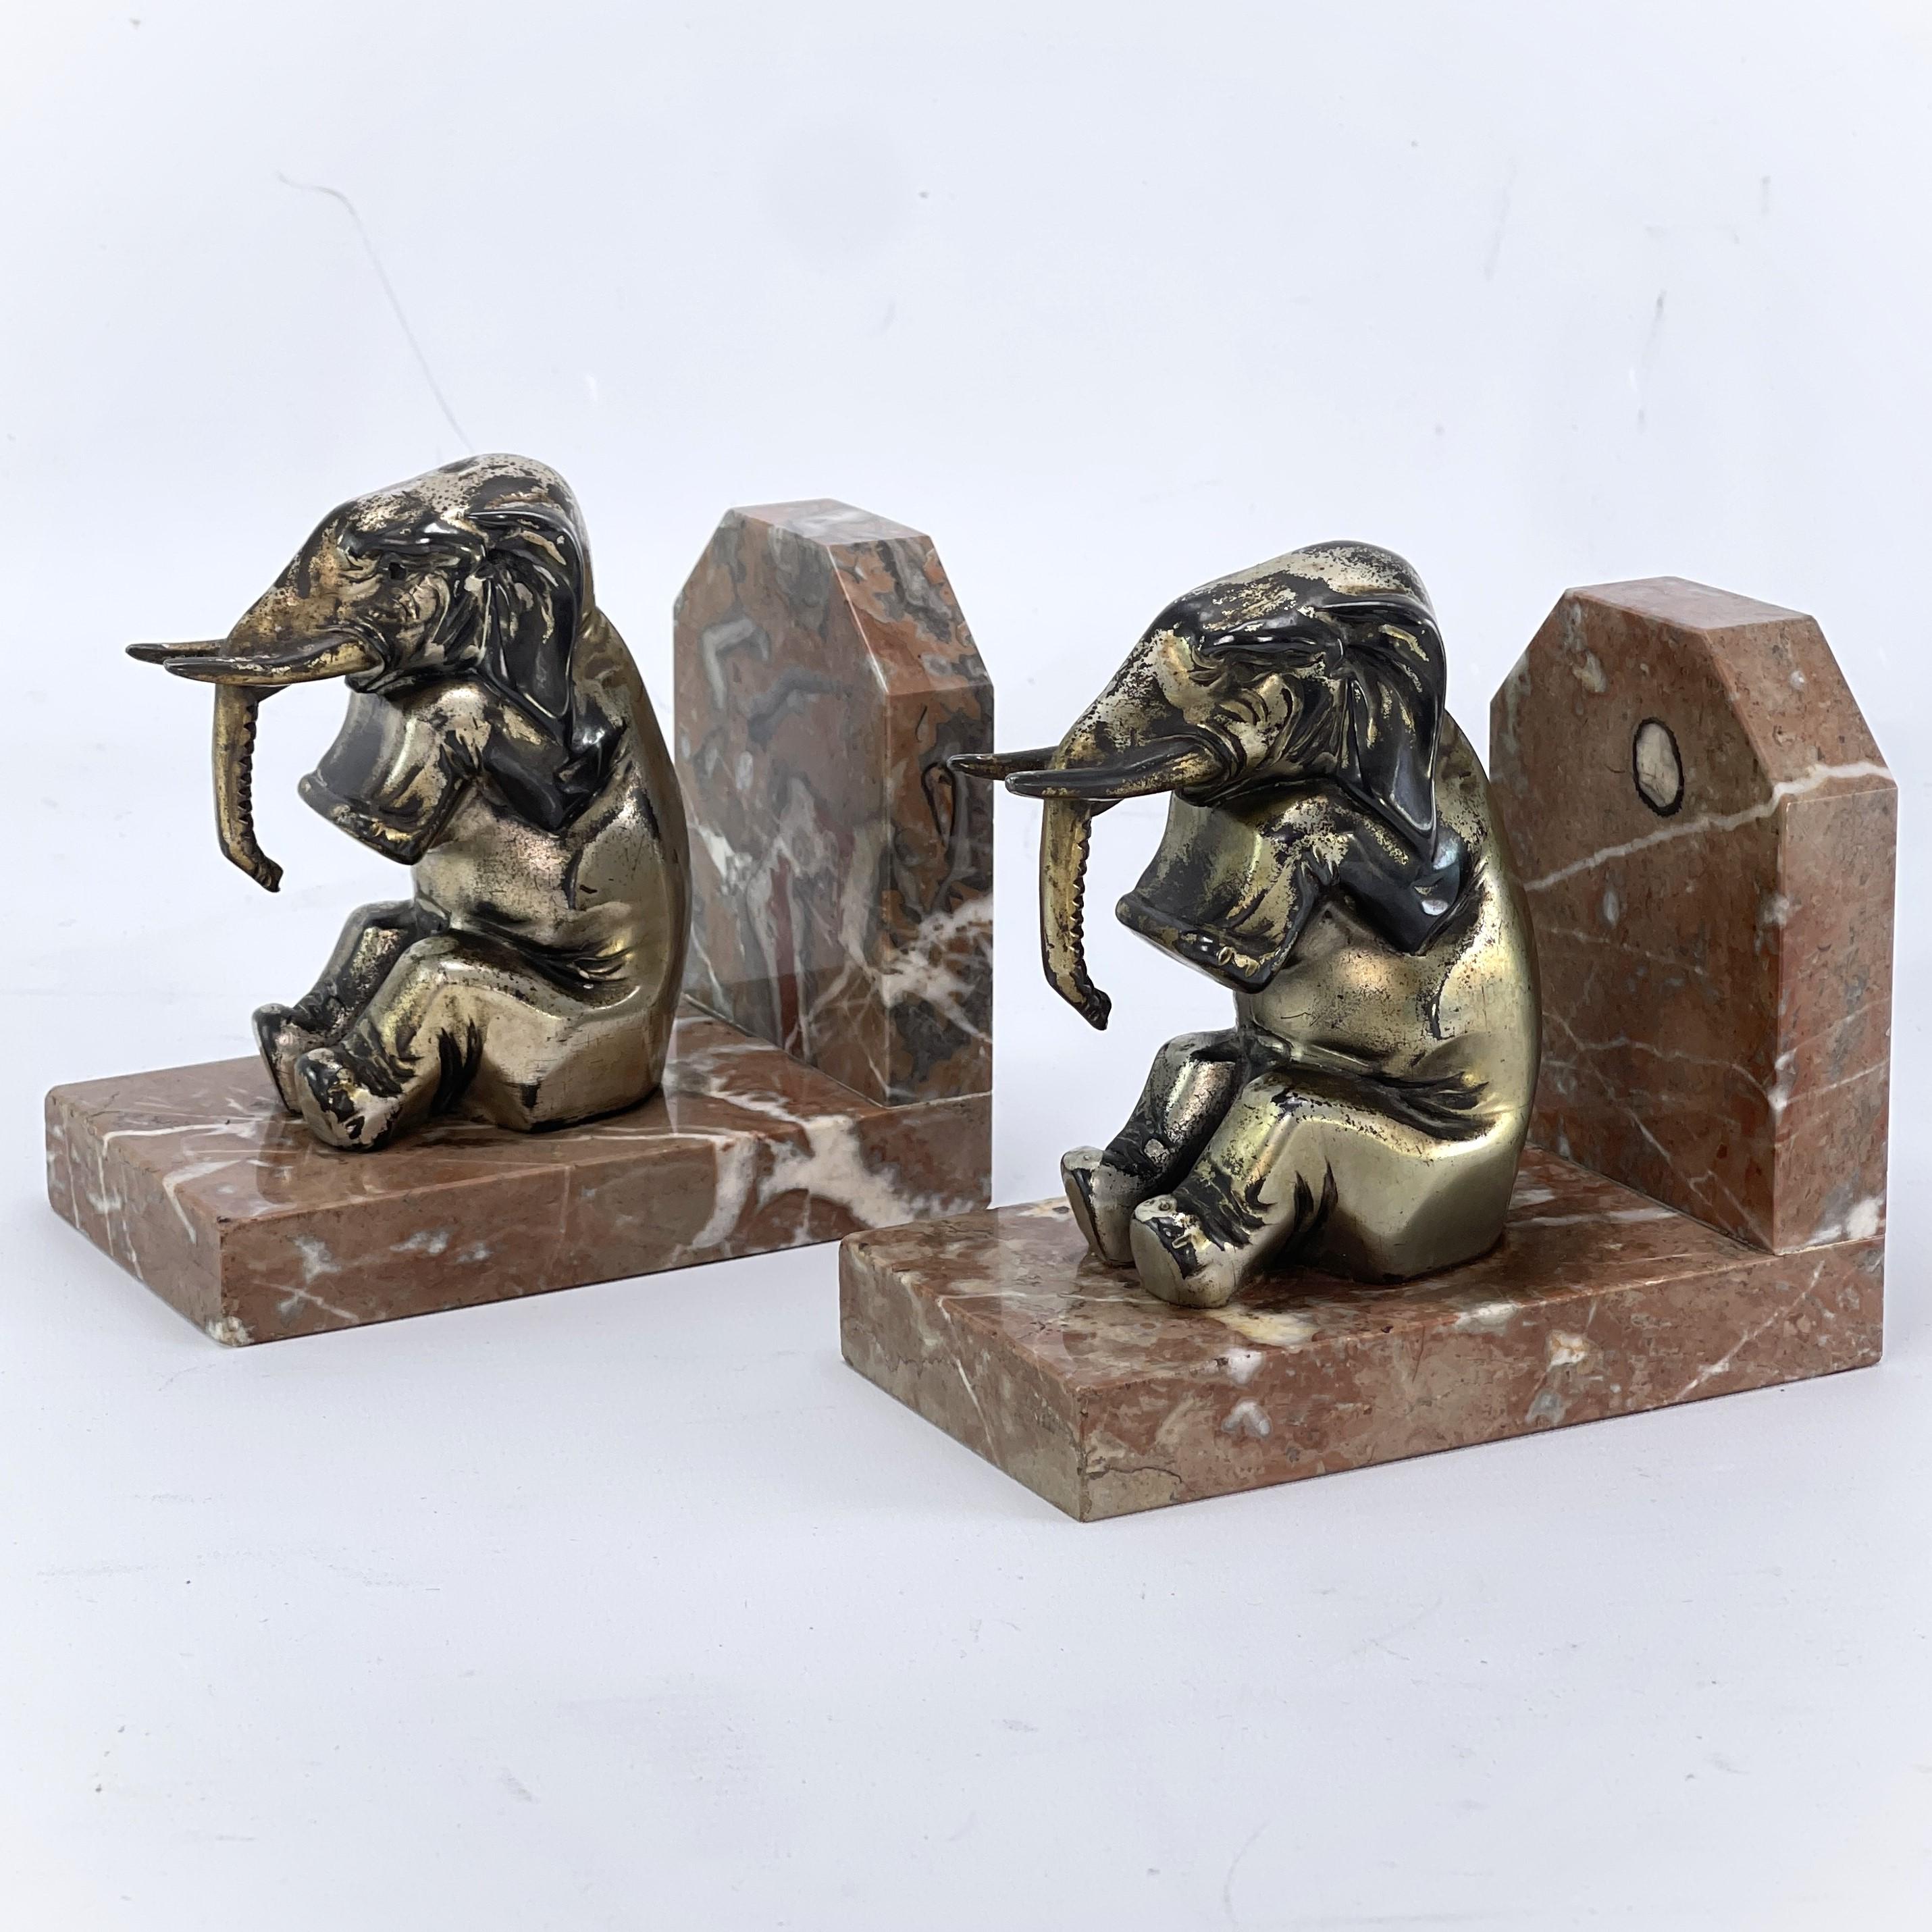 Art Deco elephant bookends - 1930s

These beautiful elephant bookends are originals from the 1930s and are typical of the Art Deco period.

Each of the cleaned items wheights 1.25 kg / 2.76 lbs.
